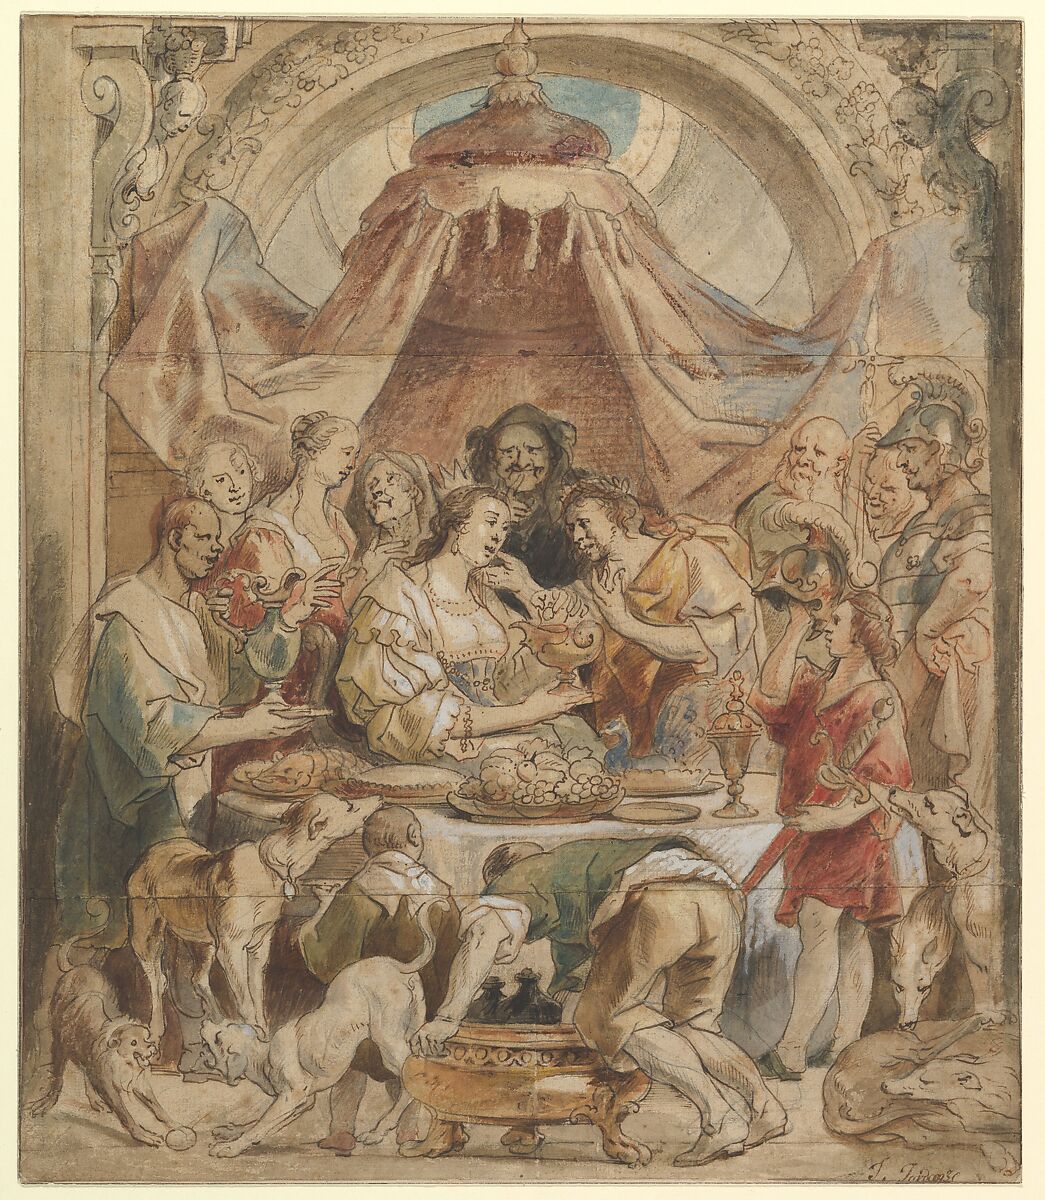 The Banquet of Anthony and Cleopatra, Jacob Jordaens (Flemish, Antwerp 1593–1678 Antwerp), Pen and brown ink, watercolor, heightened with white gouache, over black chalk 